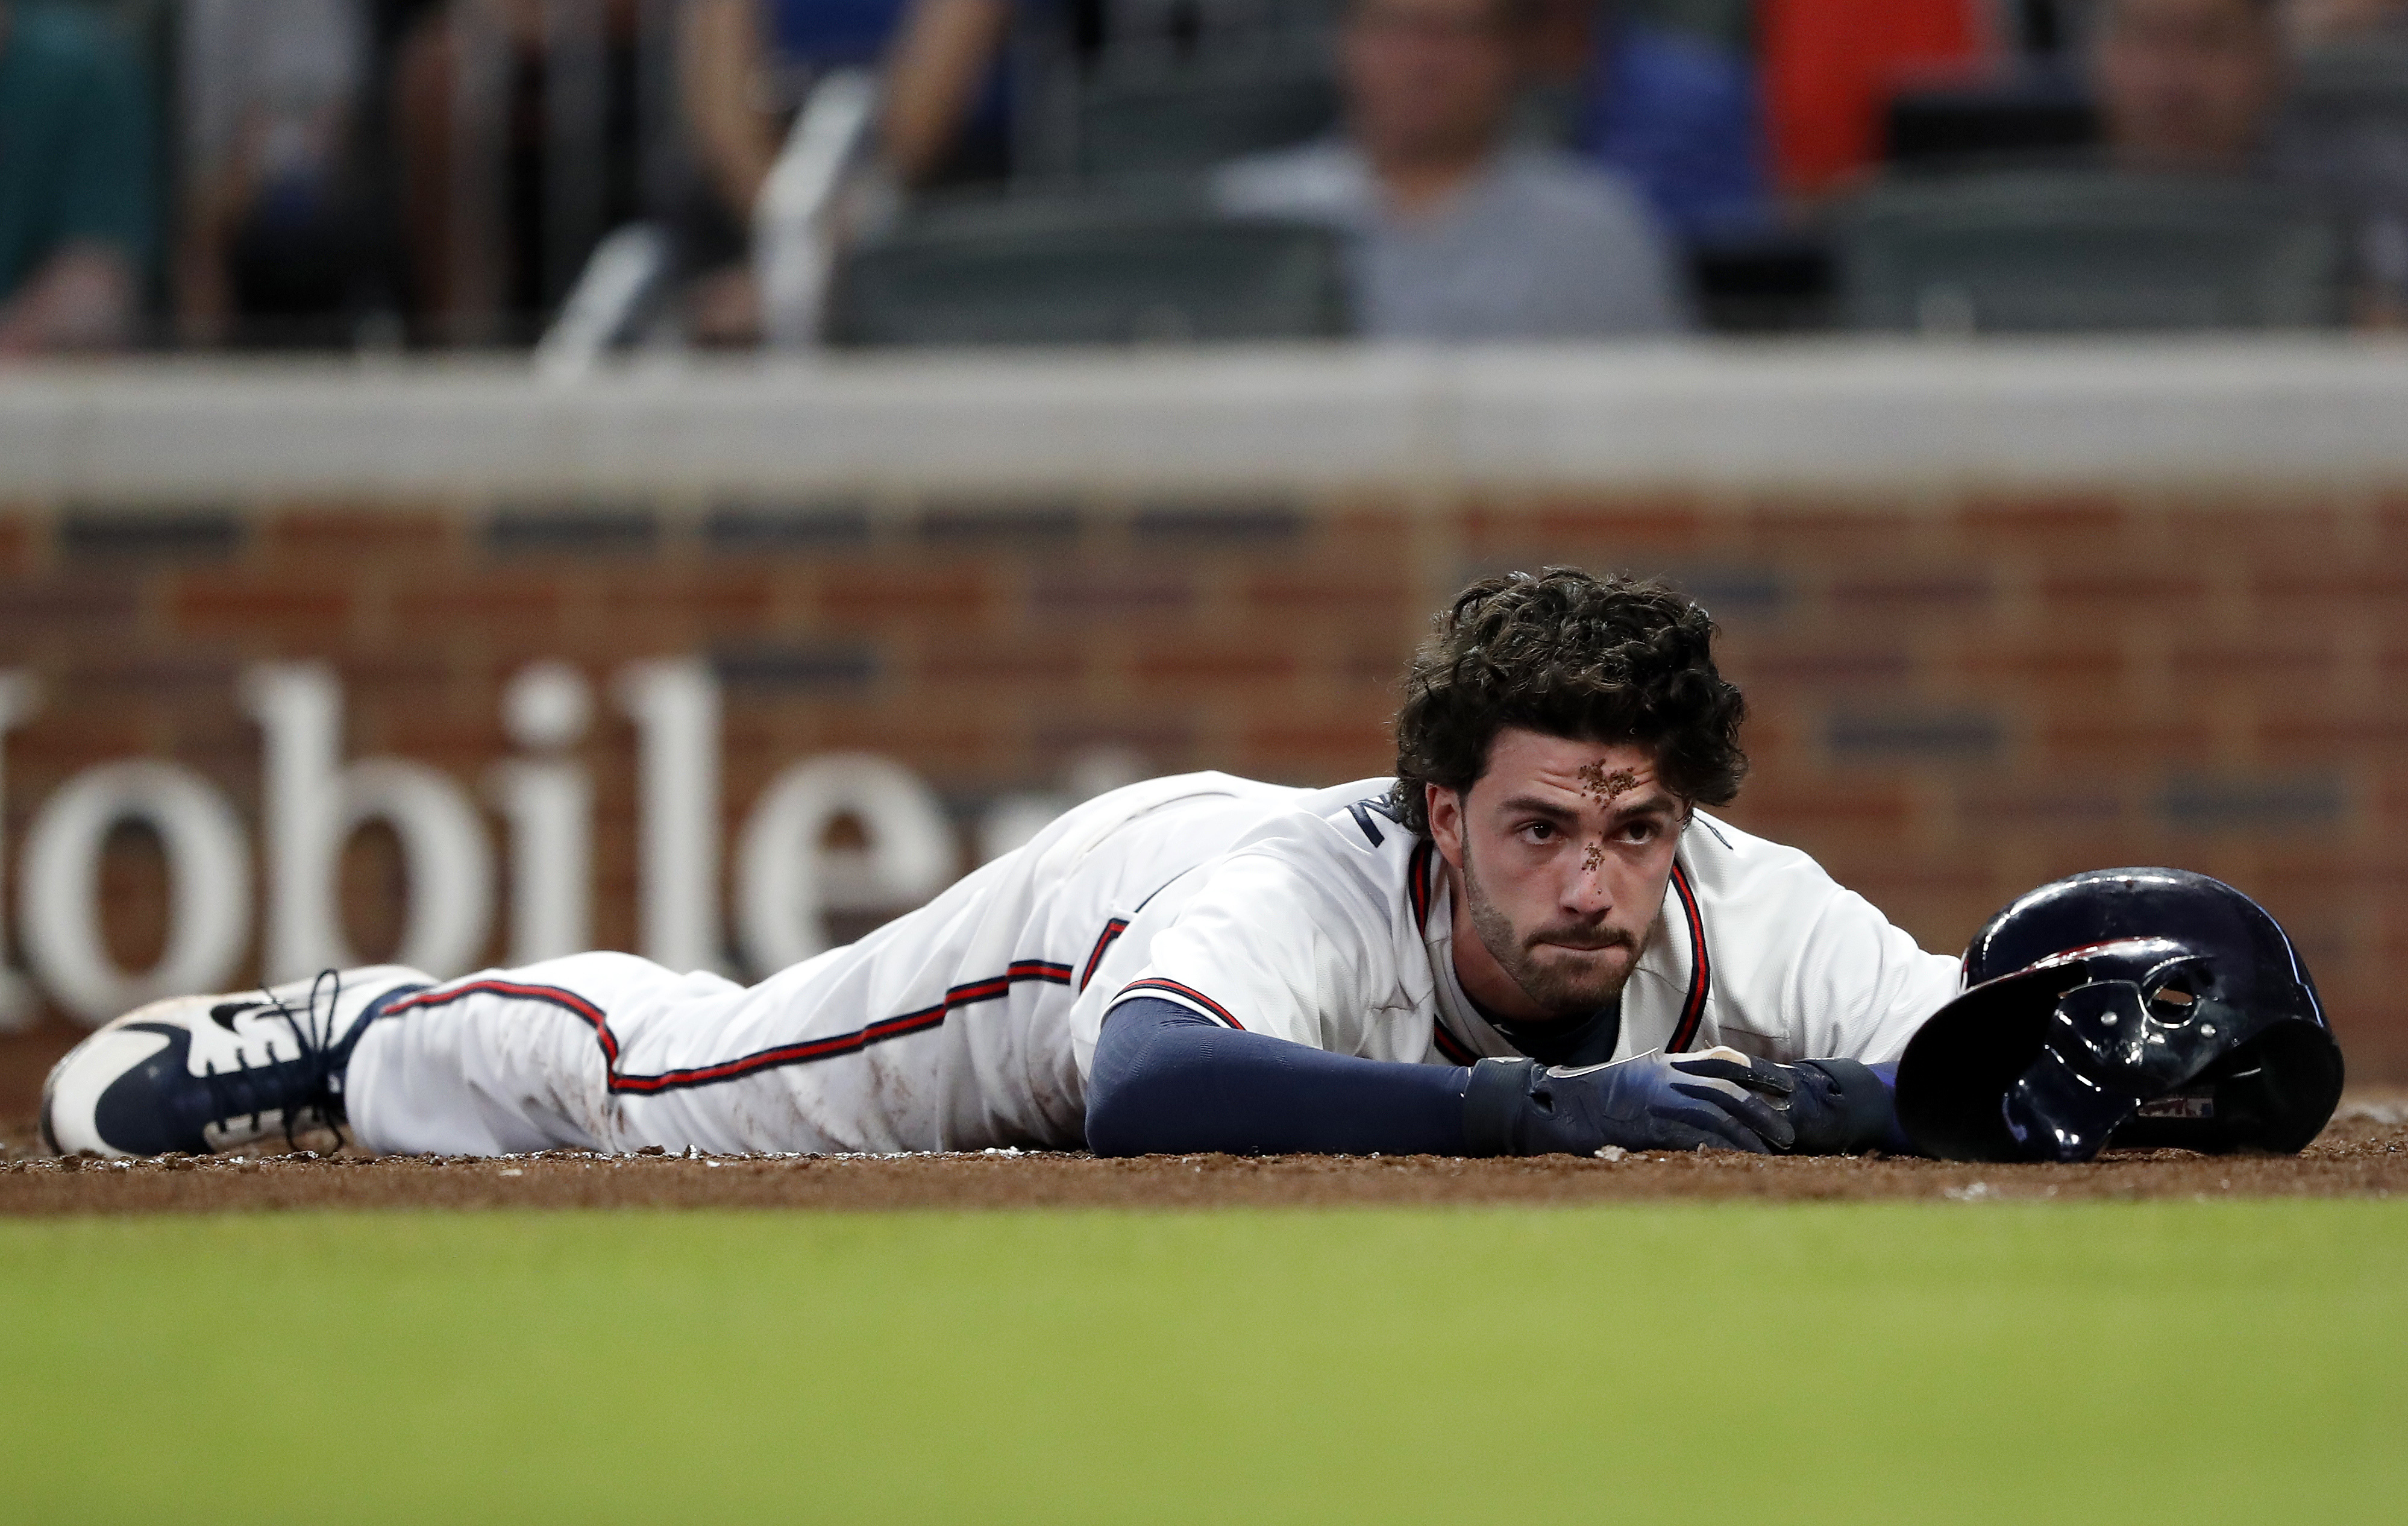 Braves News: Dansby is changing numbers - Battery Power